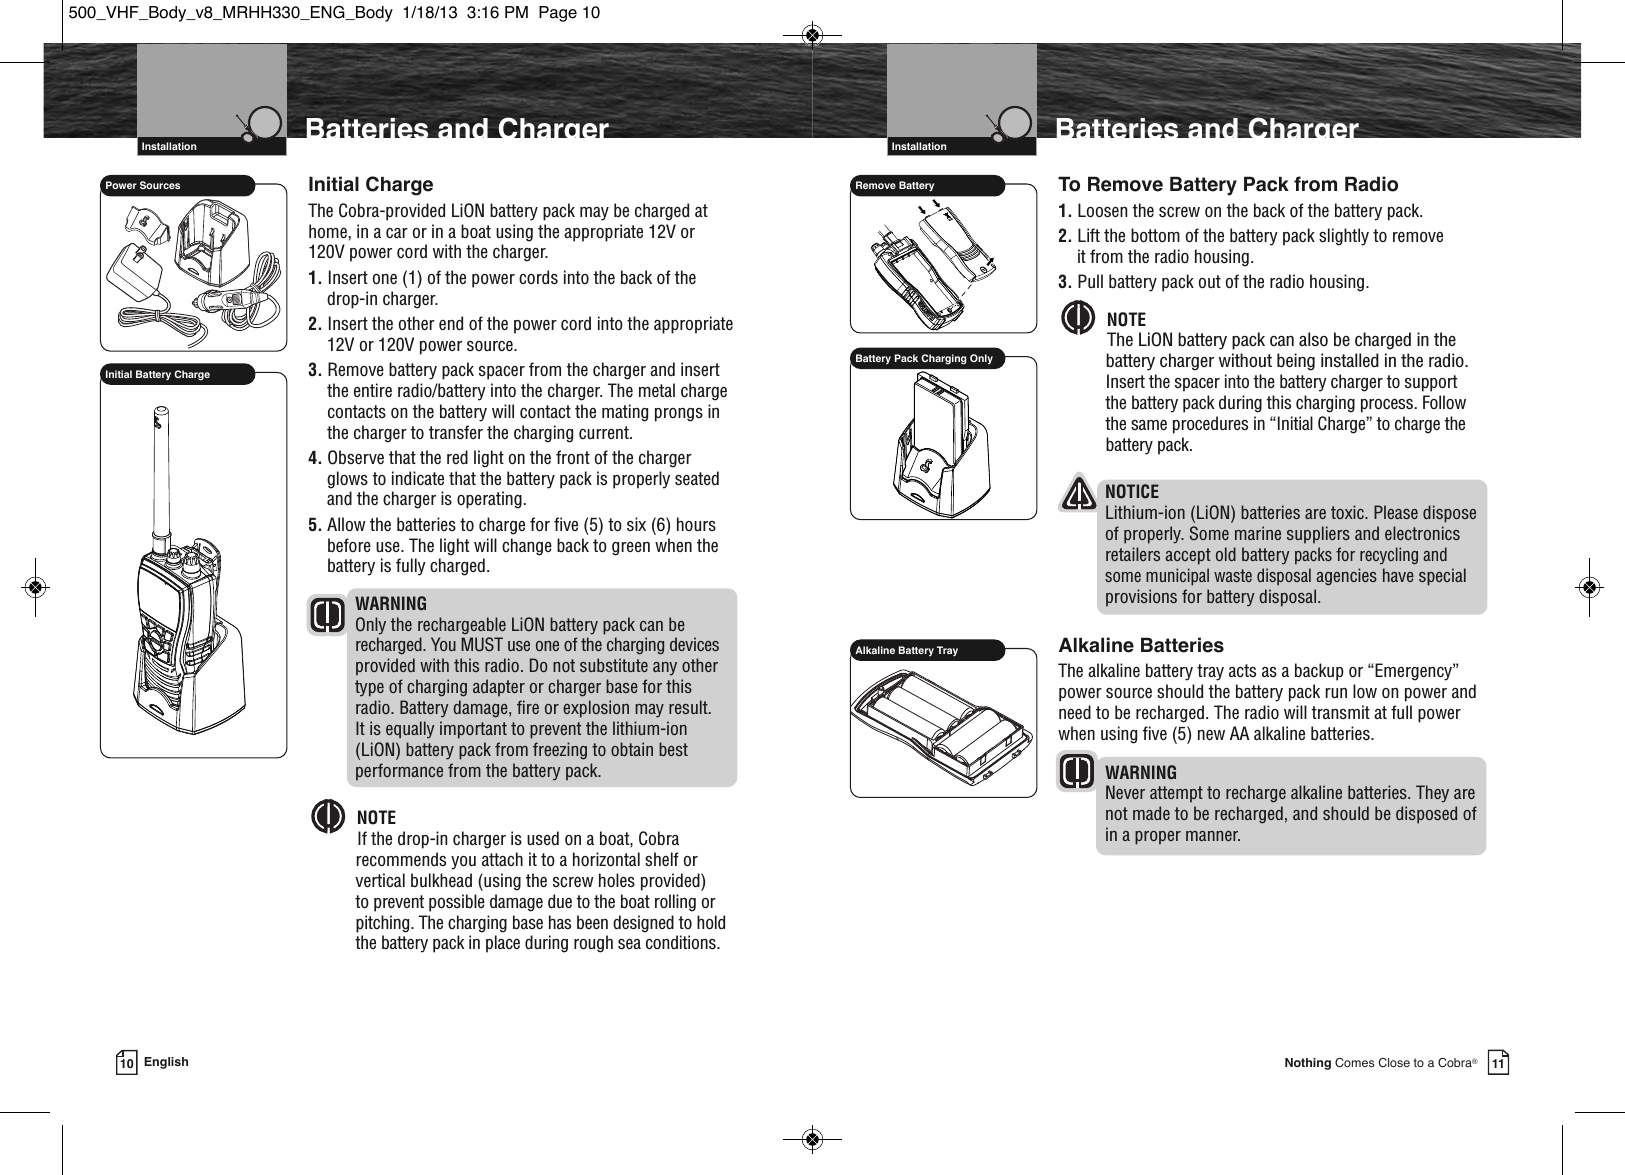 Page 8 of Cobra Electronics MRHH500 BT ACCESSORY IN MARINE RADIO User Manual MRHH330 ENG Body